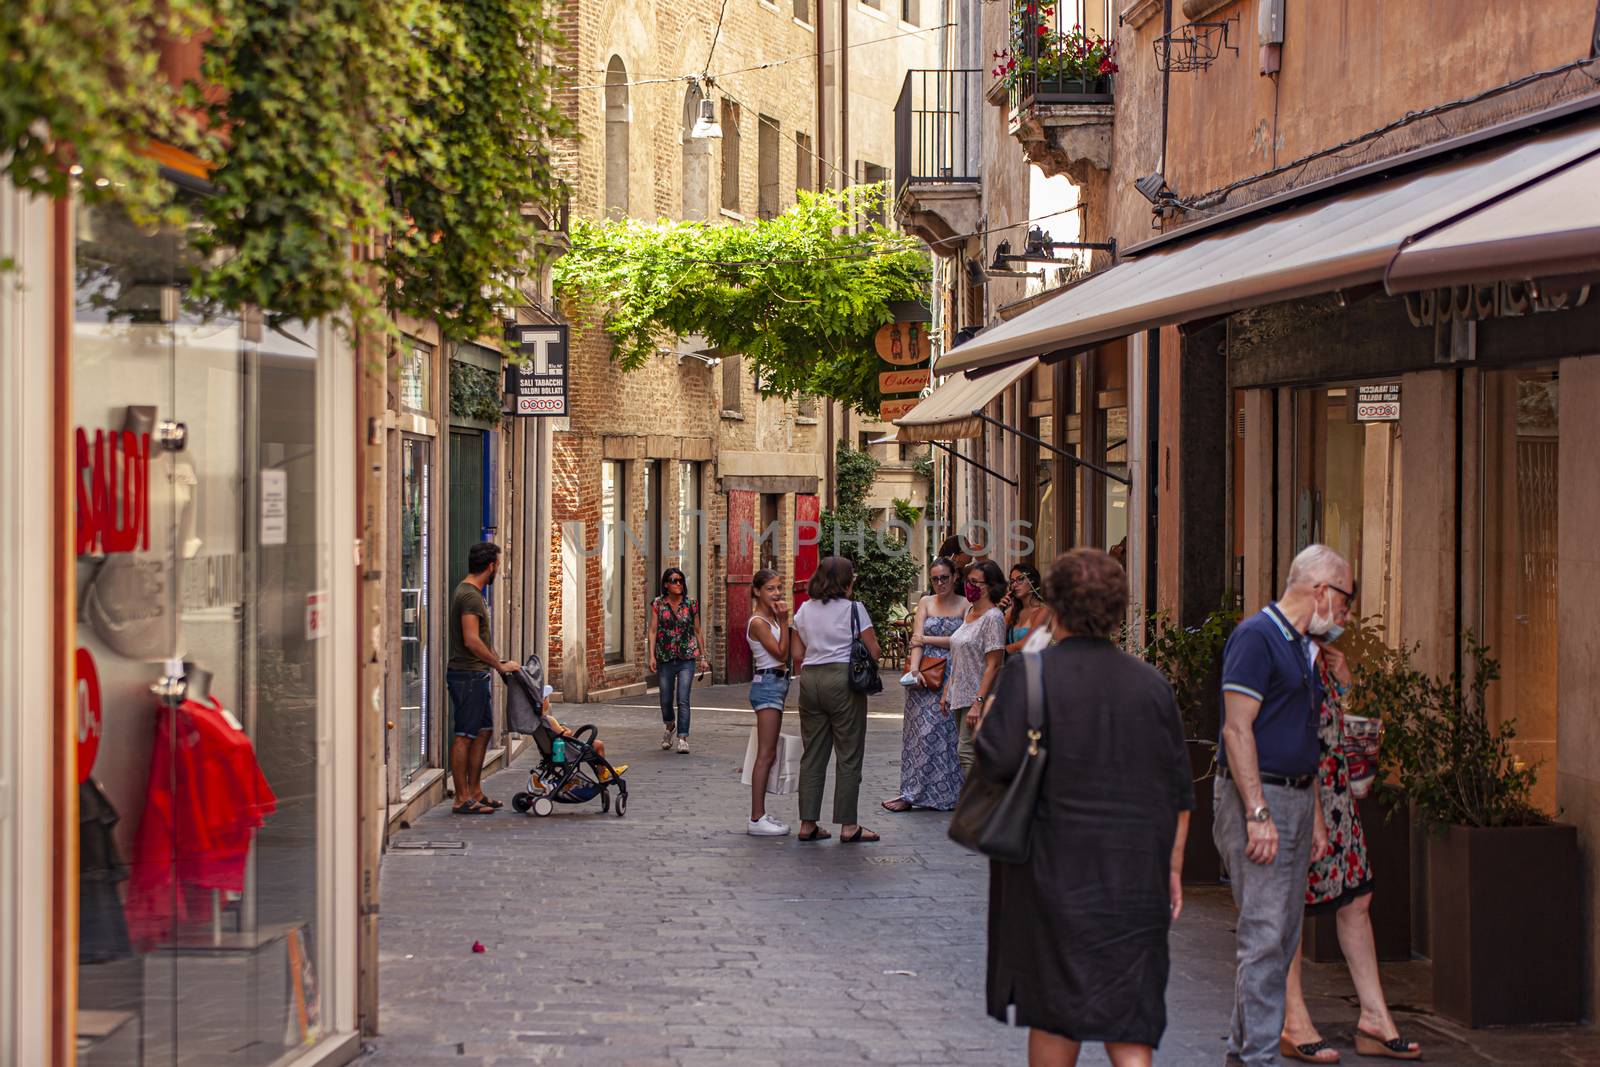 TREVISO, ITALY 13 AUGUST 2020: People walking in Treviso alley in Italy